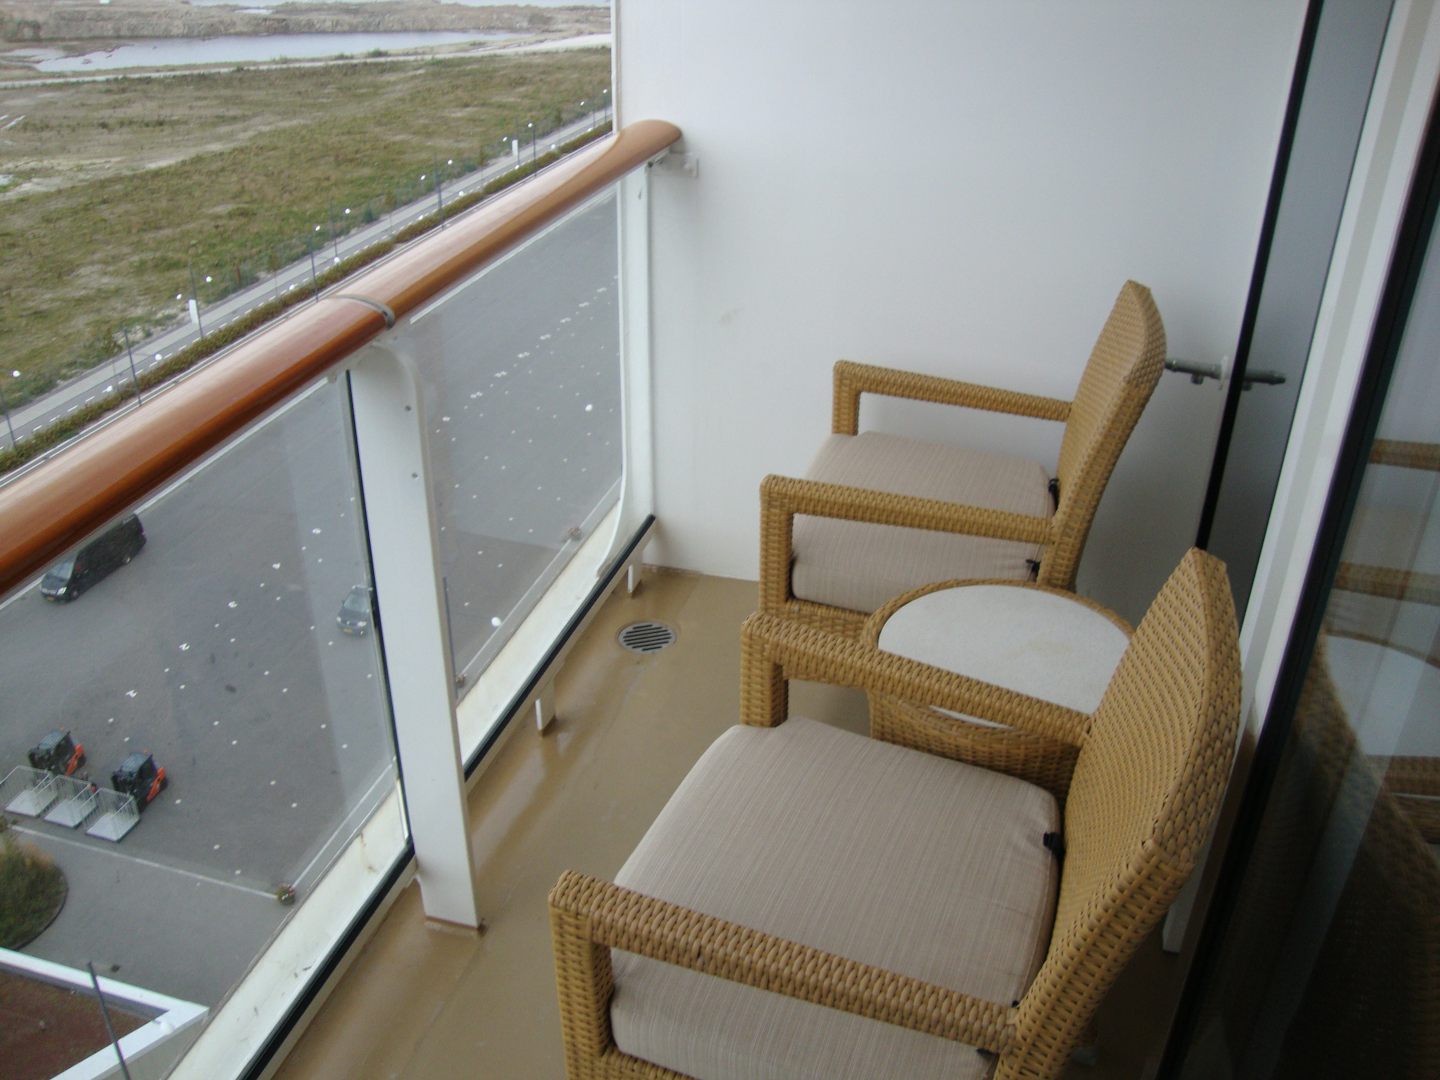 Small balcony, room 16706. Chairs have soft cushions. Good views.